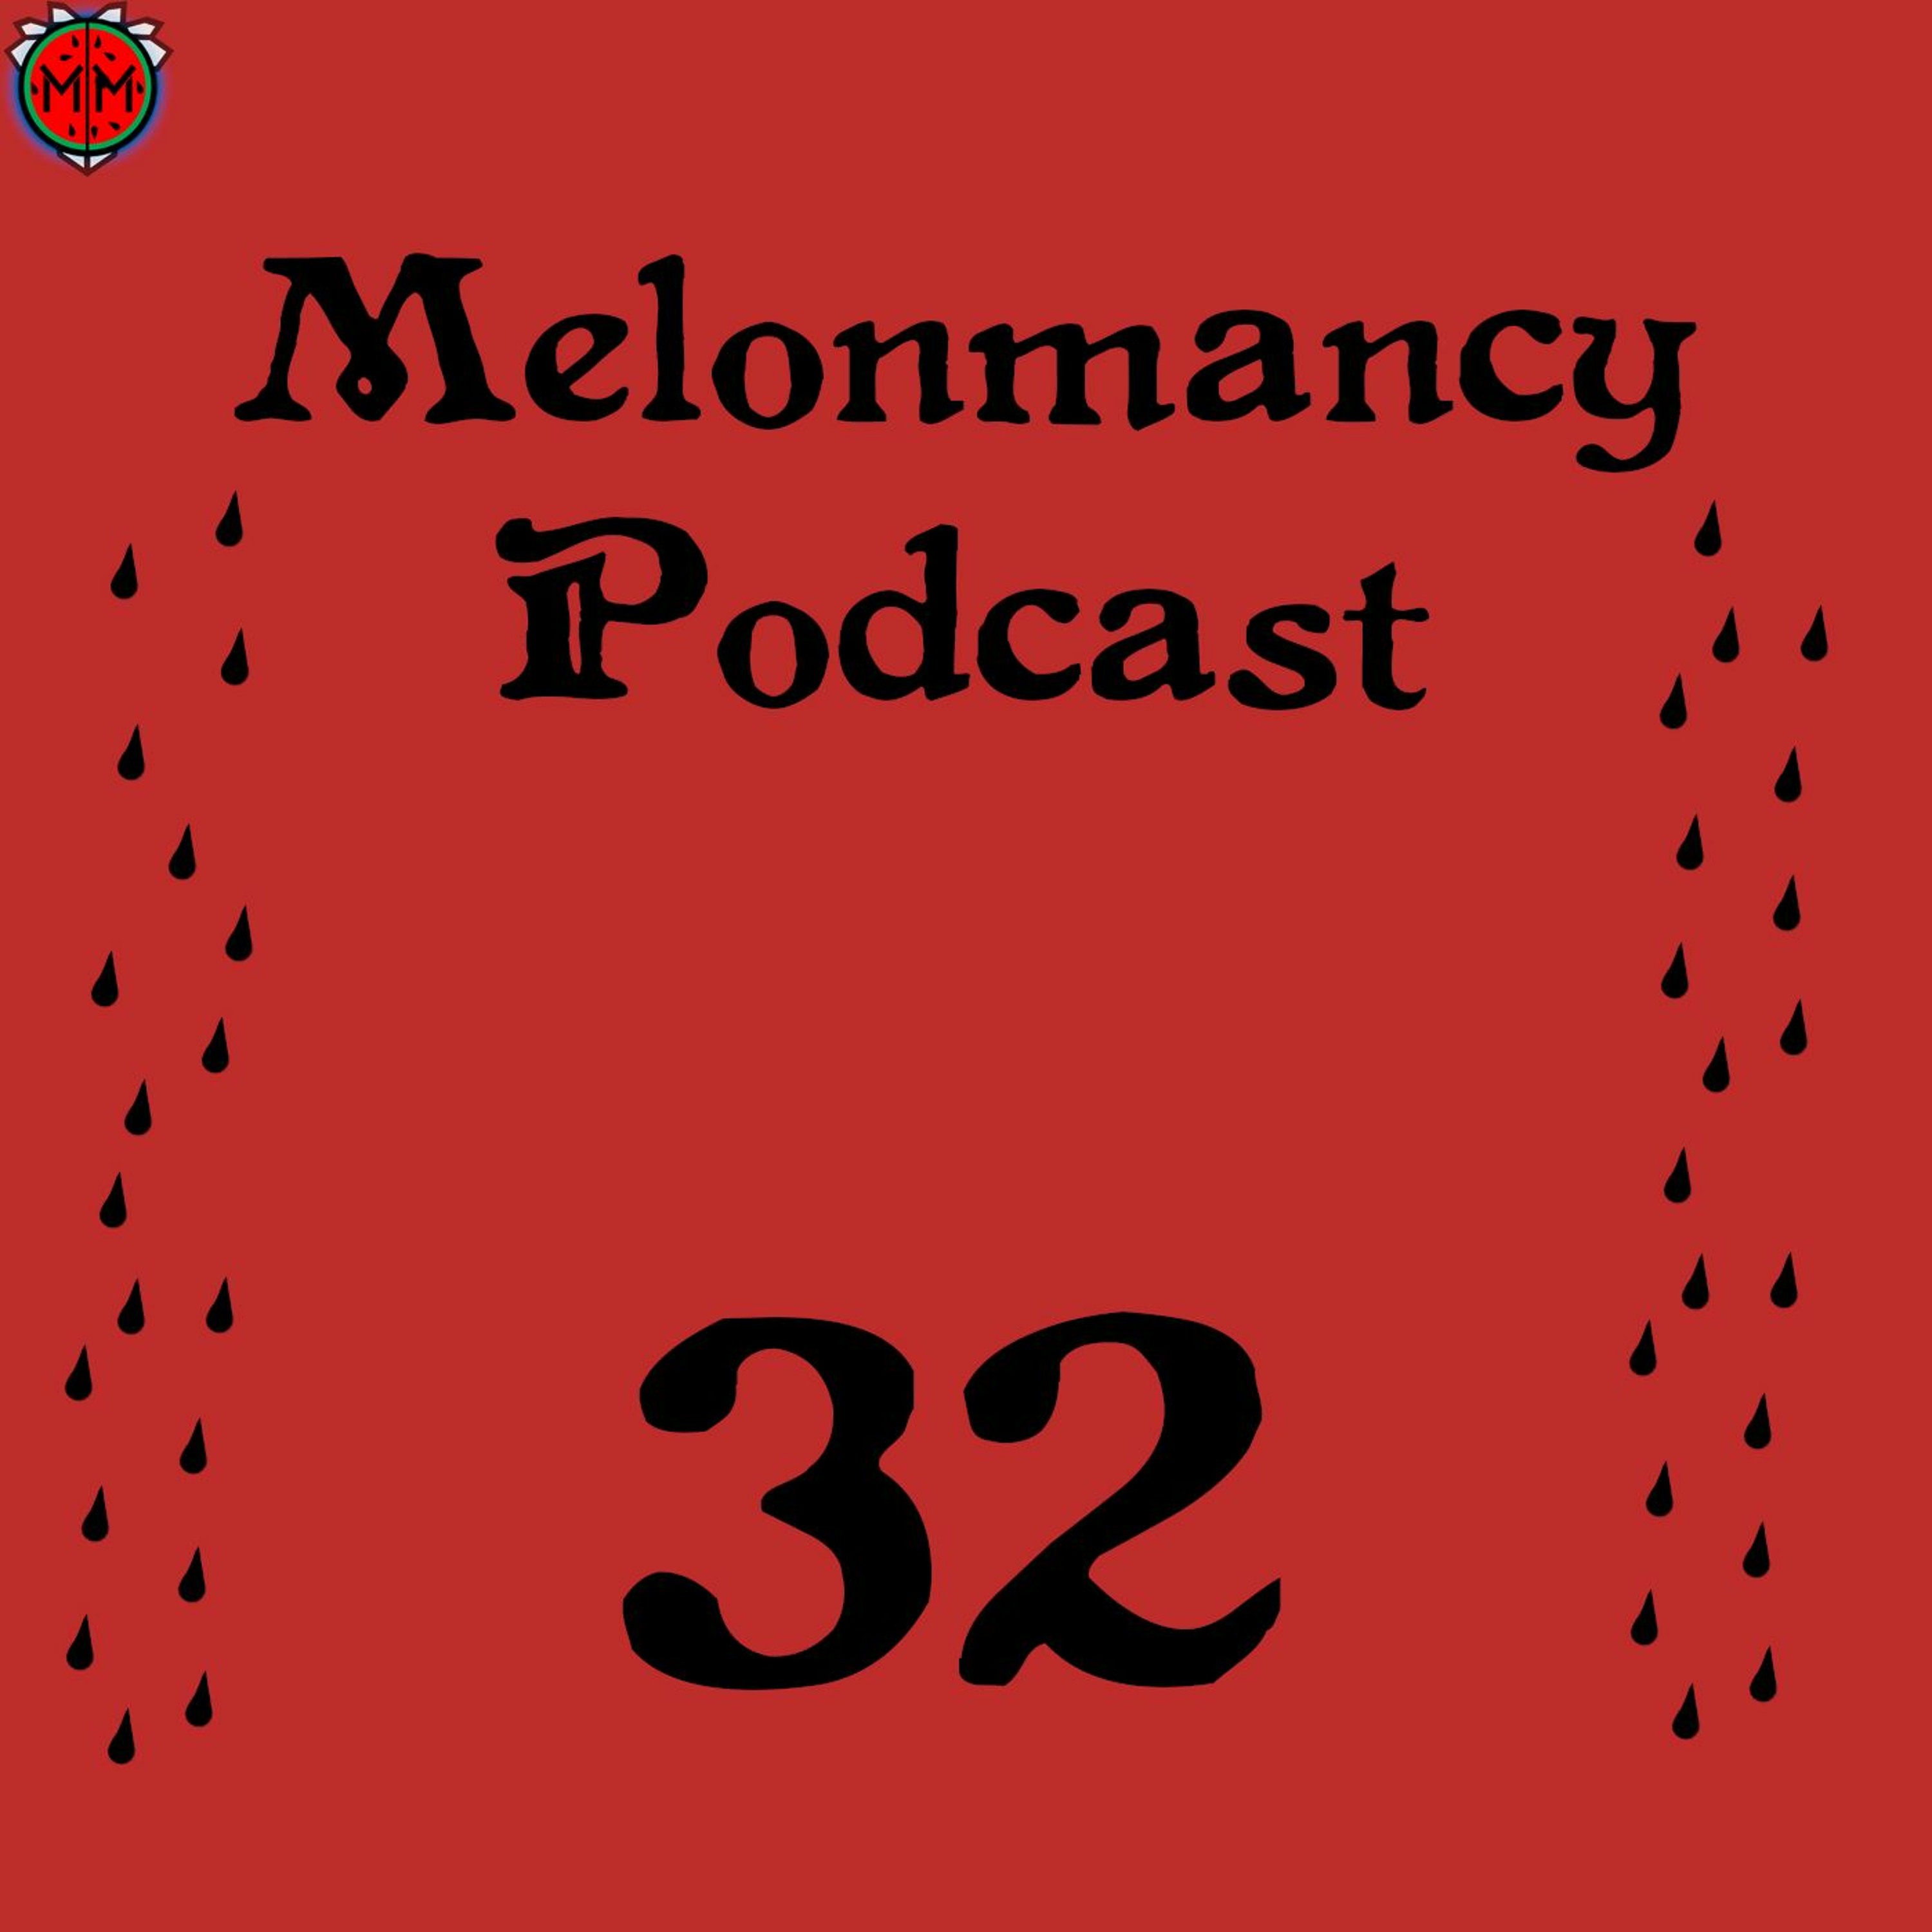 MP#32 - Teamkilling is part of my culture